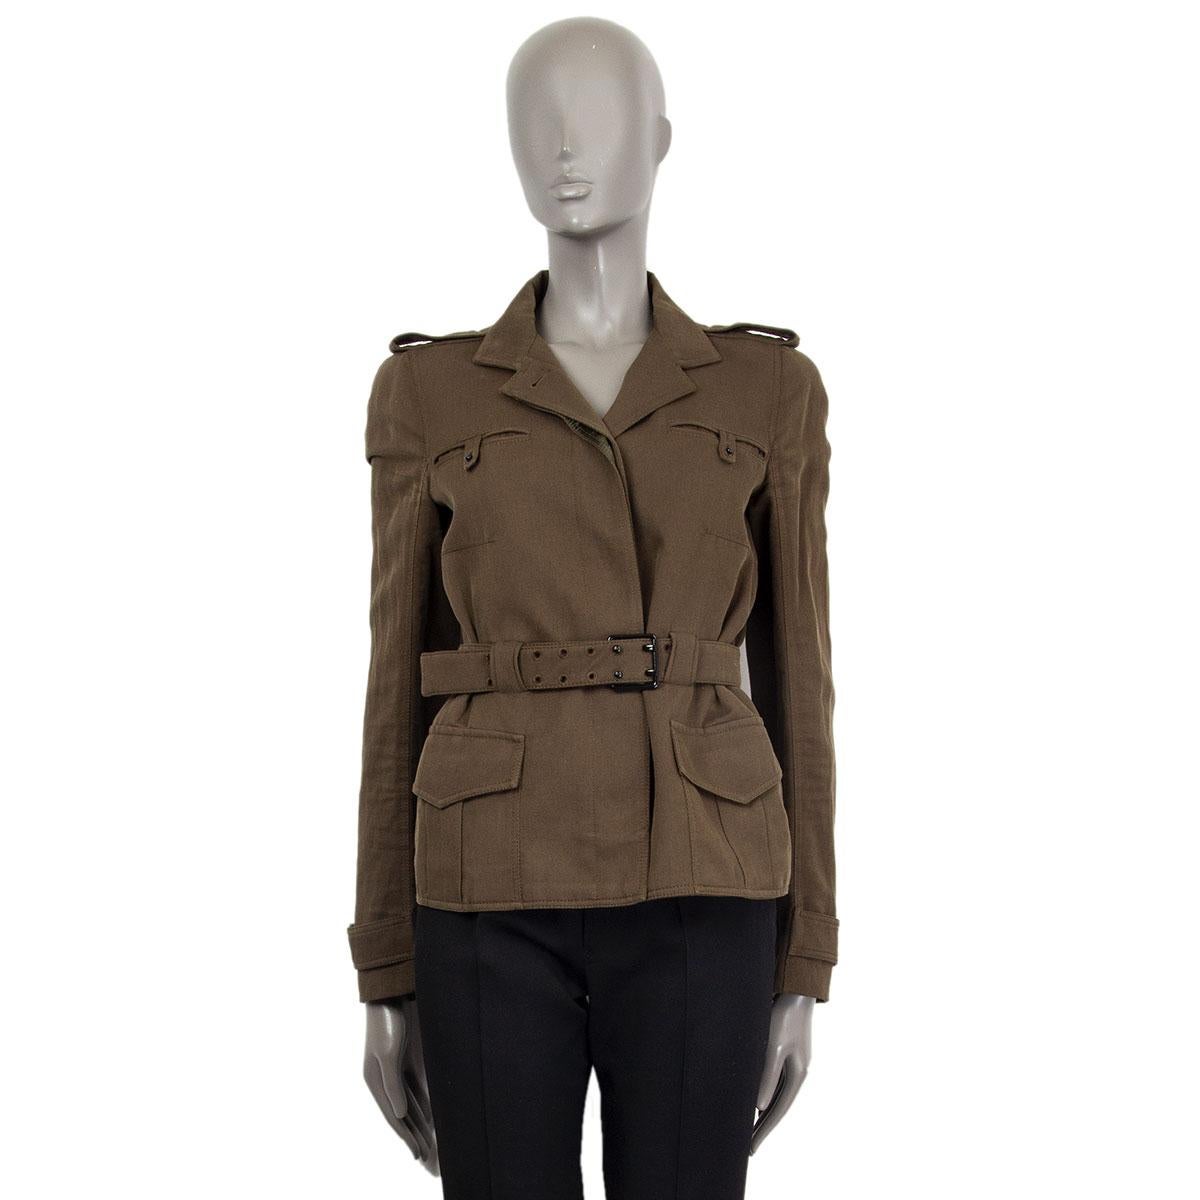 Tom Ford fitted military jacket in olive green cotton (55%) and linen (45%) with a notch collar, apaulettes, two keyhole chest pockets, two front flap pockets and decorative belted cuffs. Closes on the front with buttons and fastens with an attached